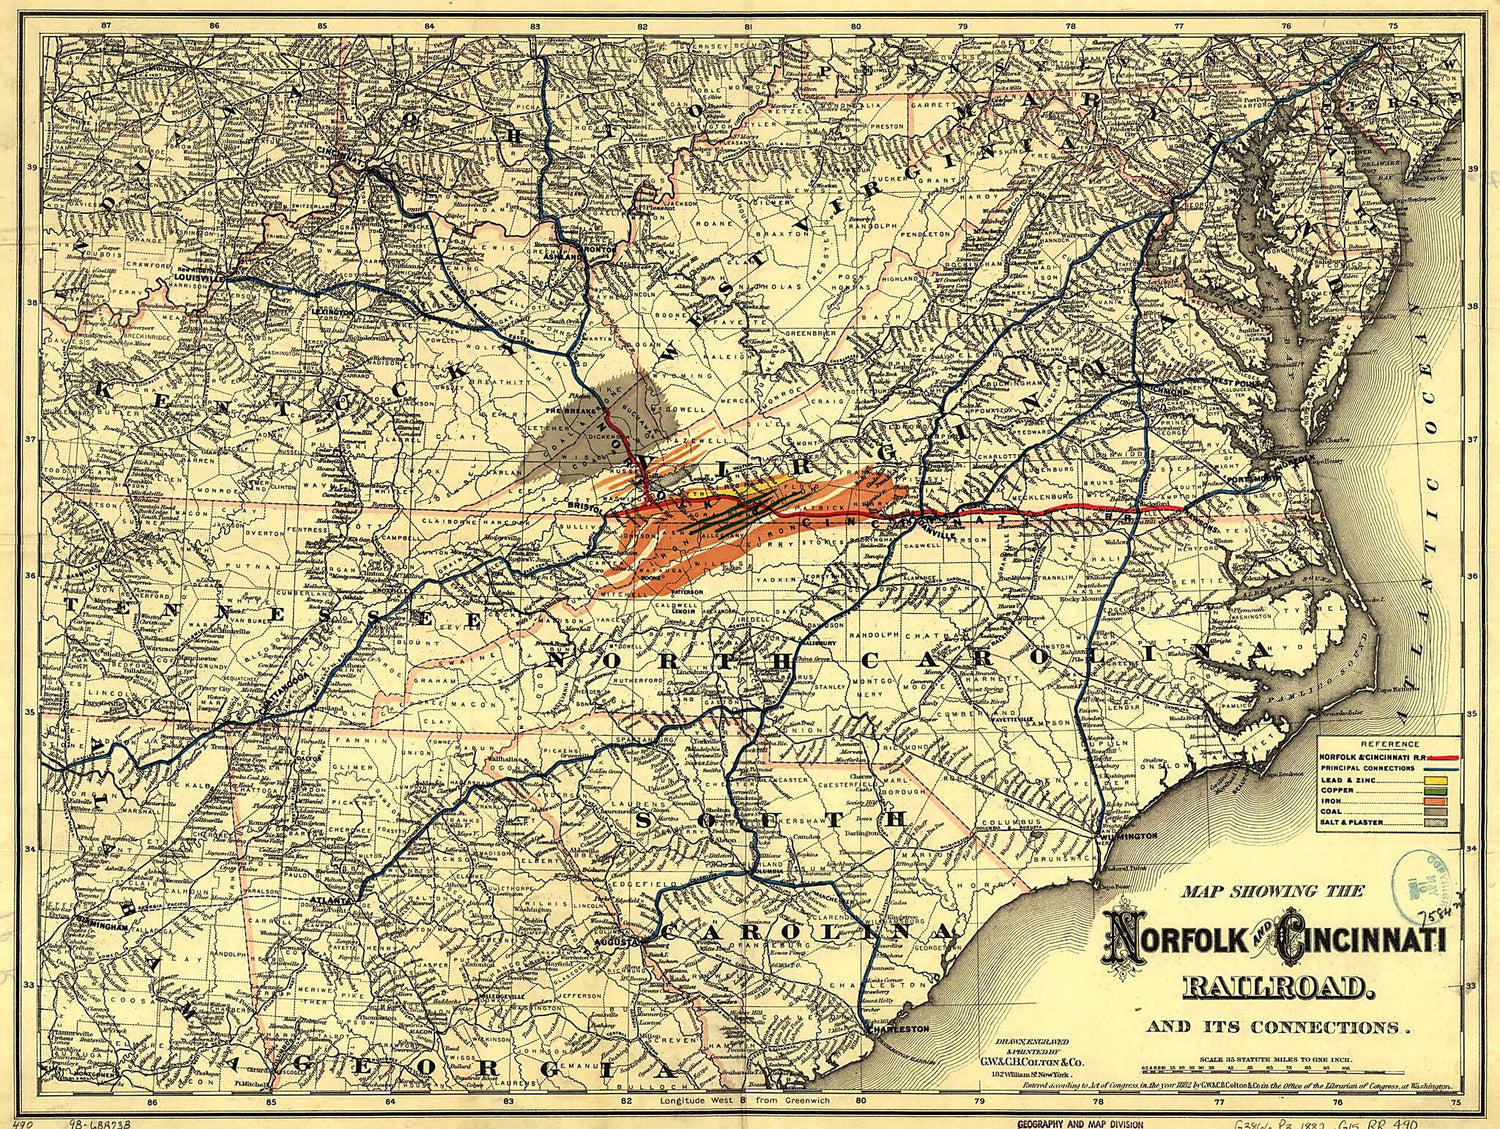 This old map of Map Showing the Norfolk and Cincinnati Railroad, and Its Connections from 1882 was created by  G.W. &amp; C.B. Colton &amp; Co,  Norfolk and Cincinnati Railroad in 1882